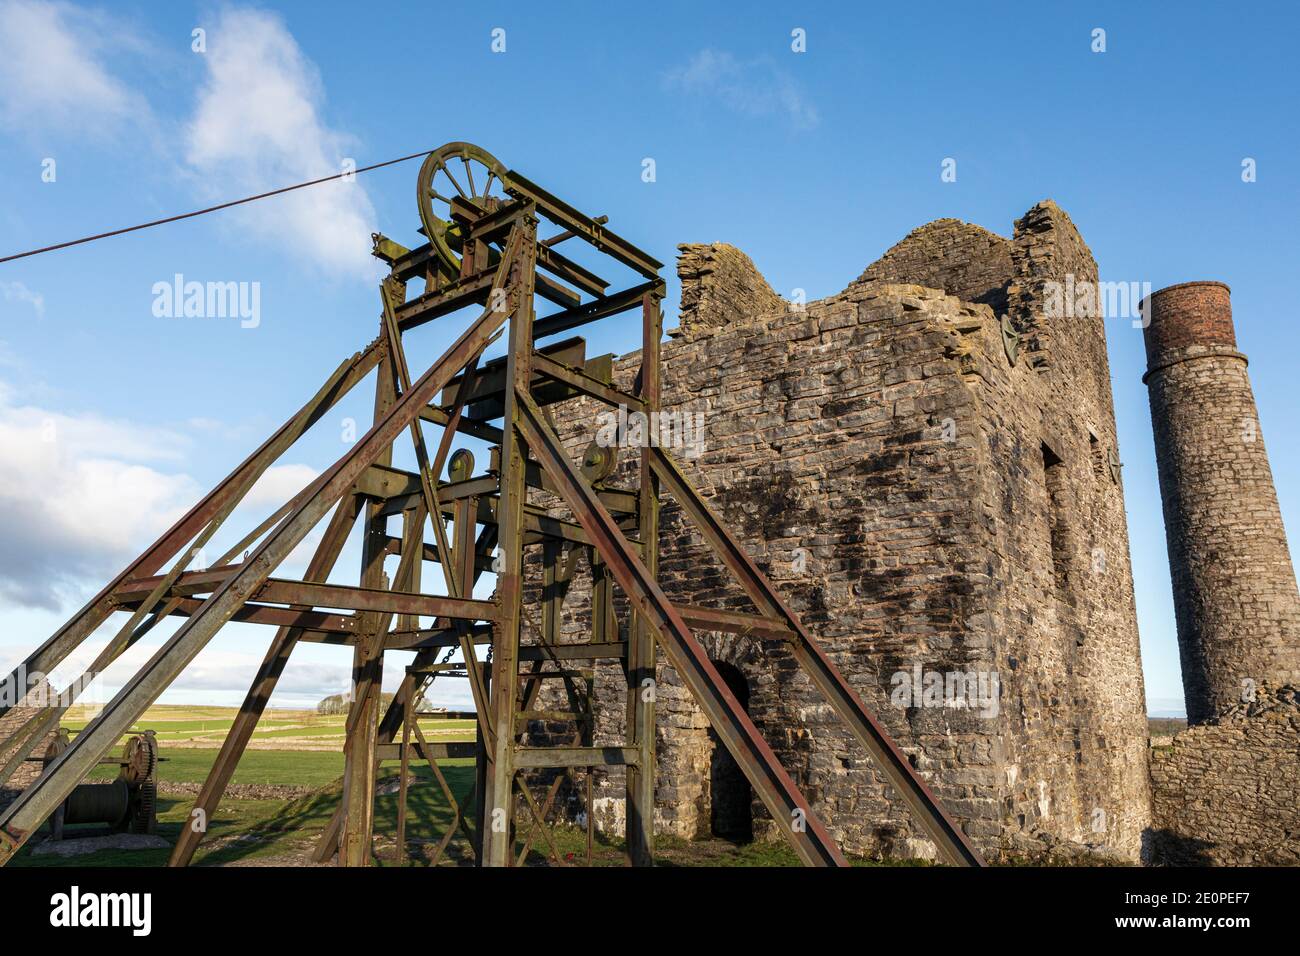 An old lead mine - Magpie Mine - at Sheldon in the Peak District National Park, Derbyshire Stock Photo